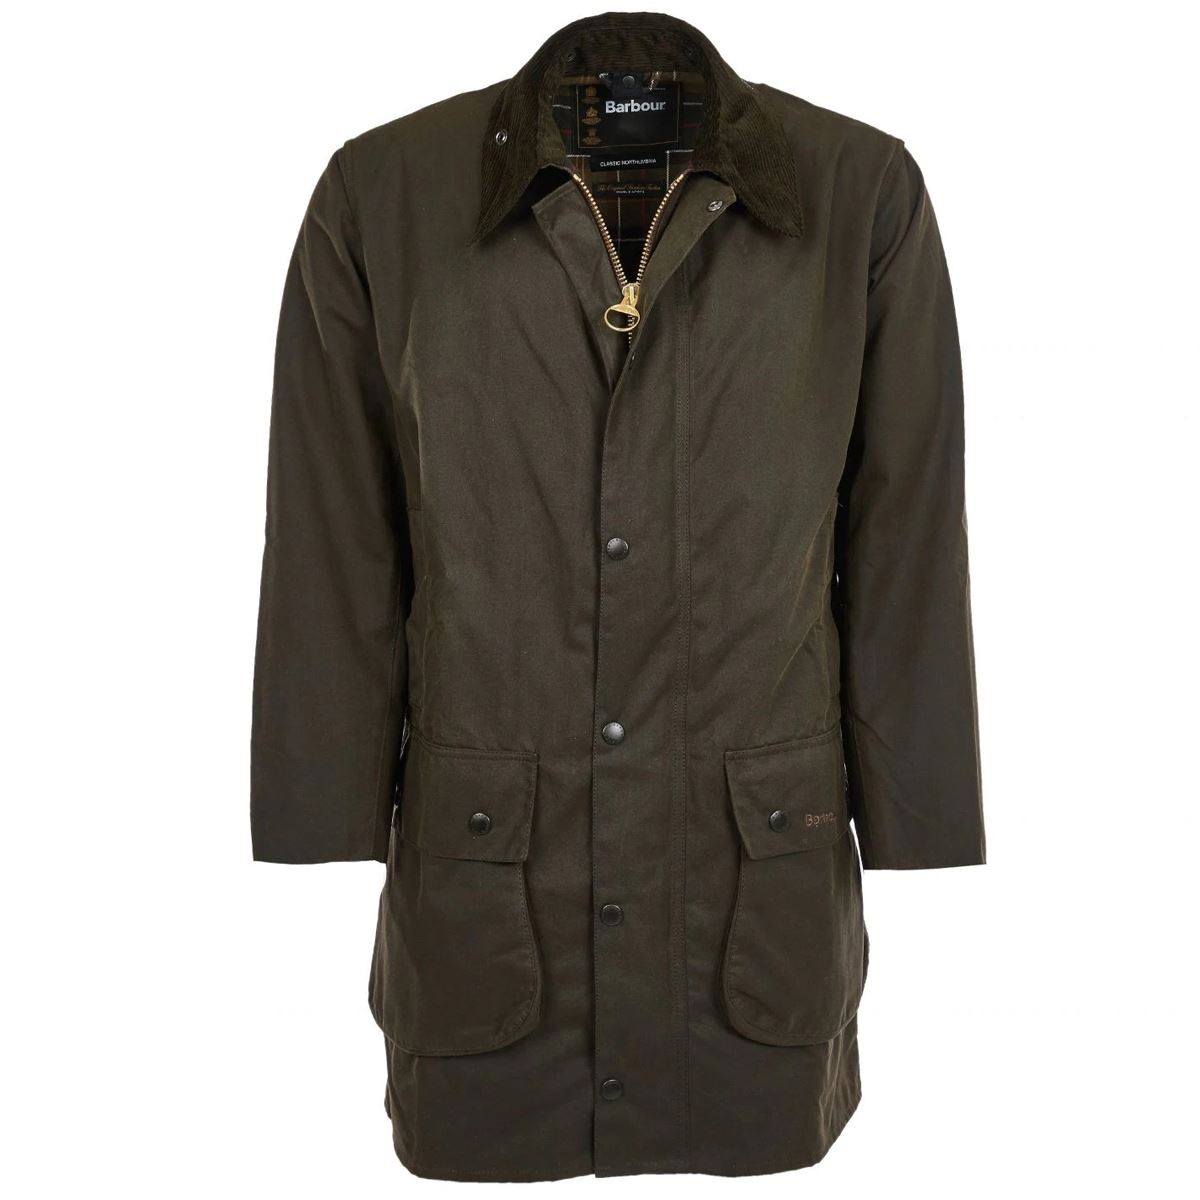 What is the size of the Barbour Northumbria Wax Jacket?